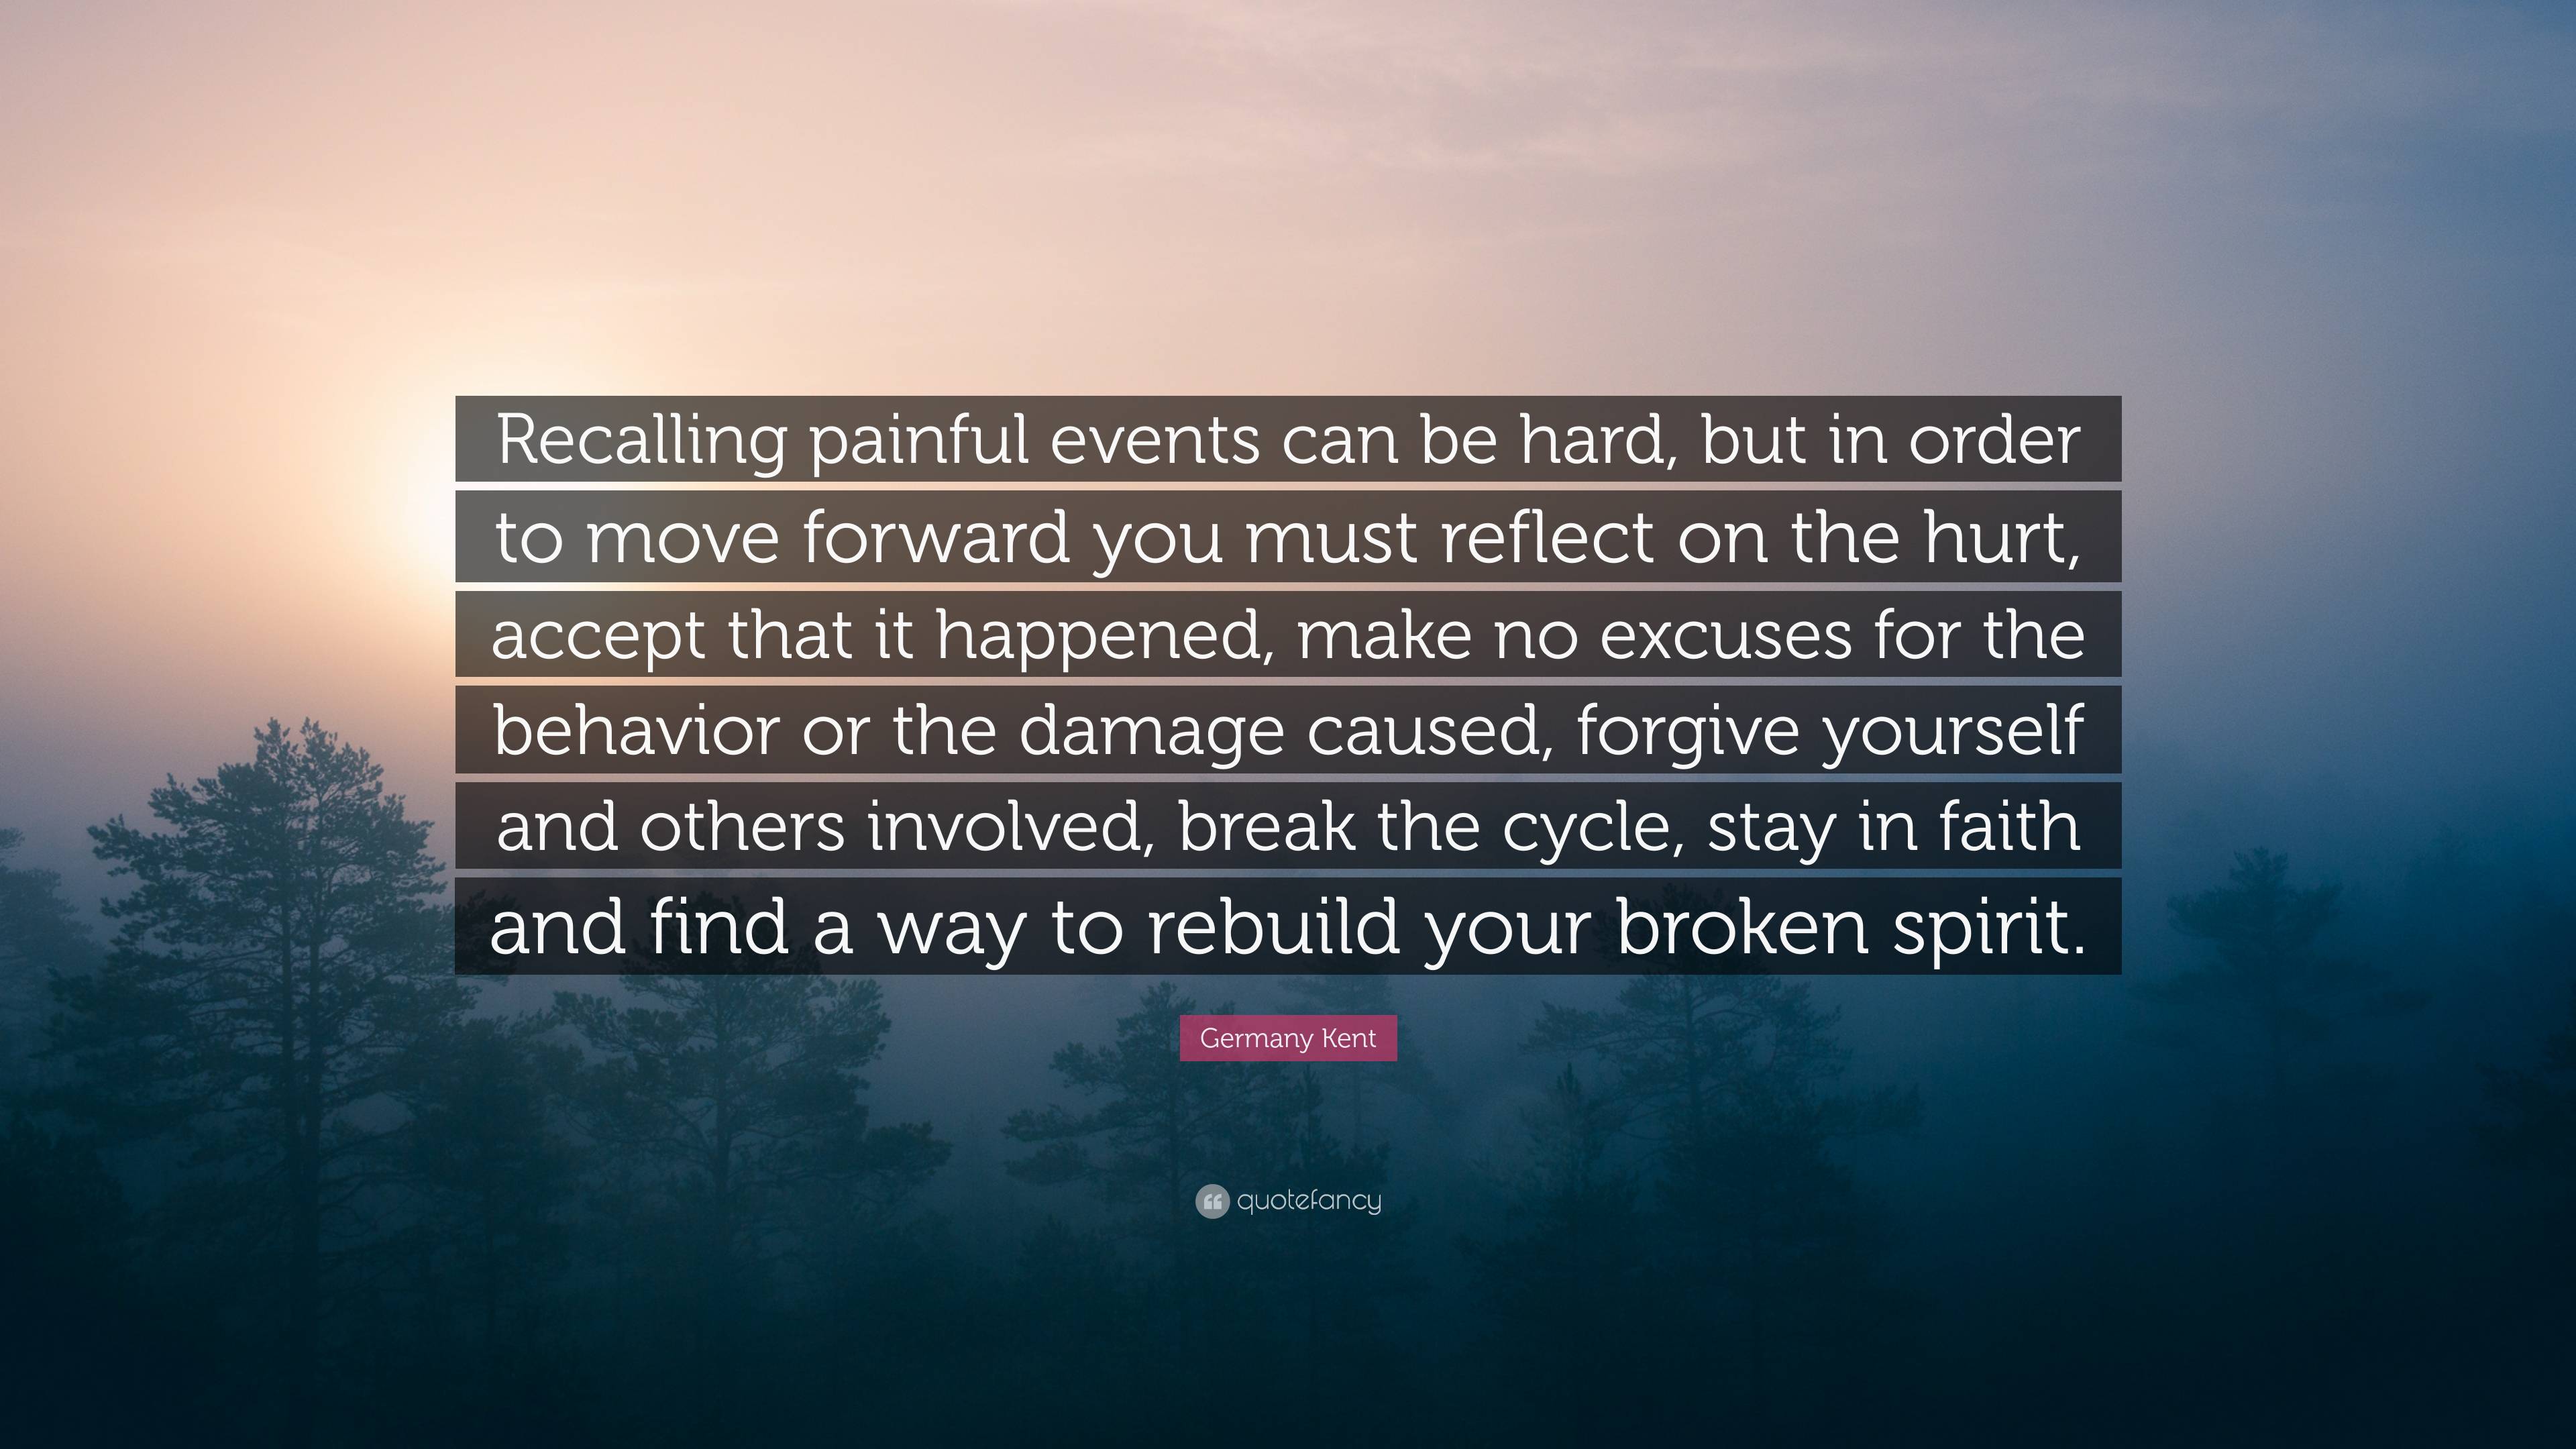 quotes about moving forward after being hurt